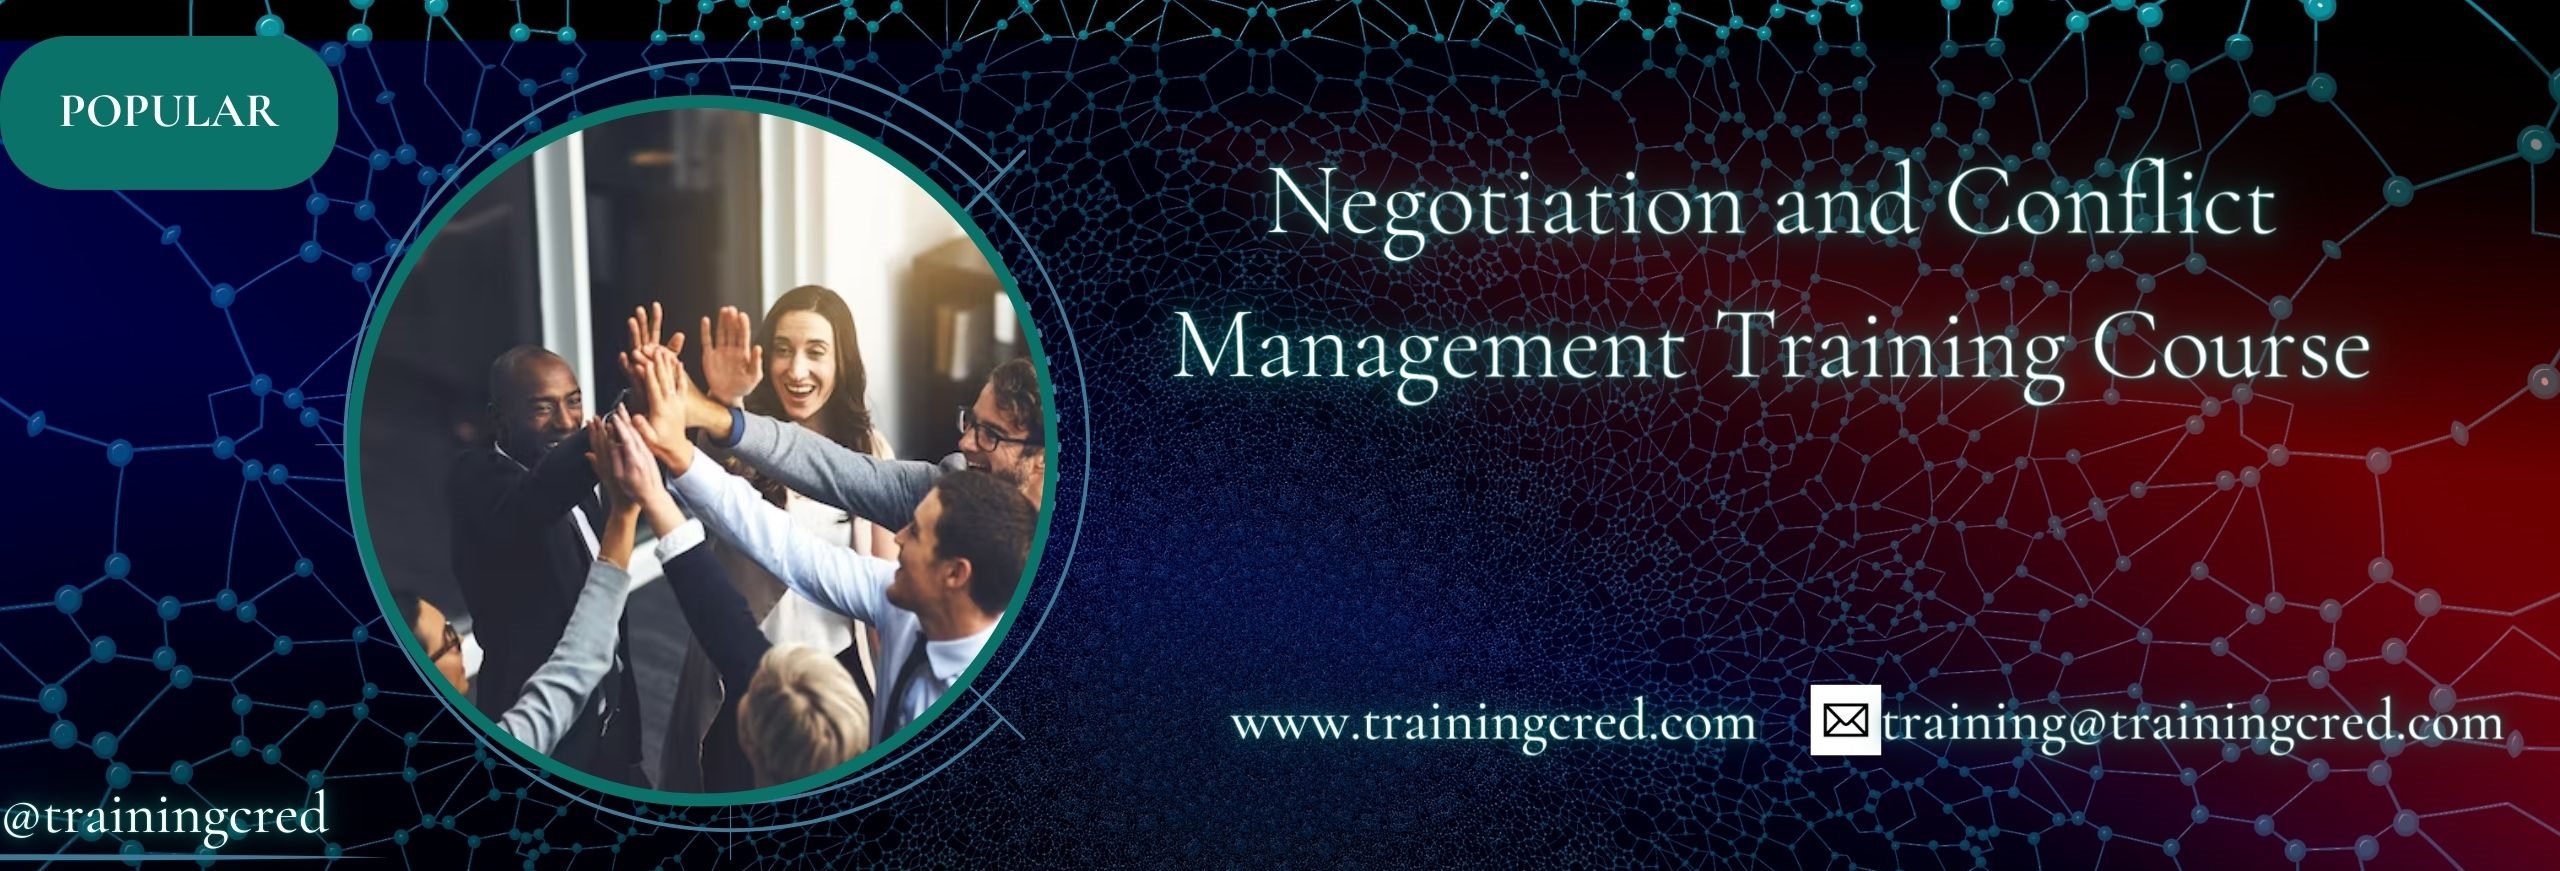 Negotiation and Conflict Management Training